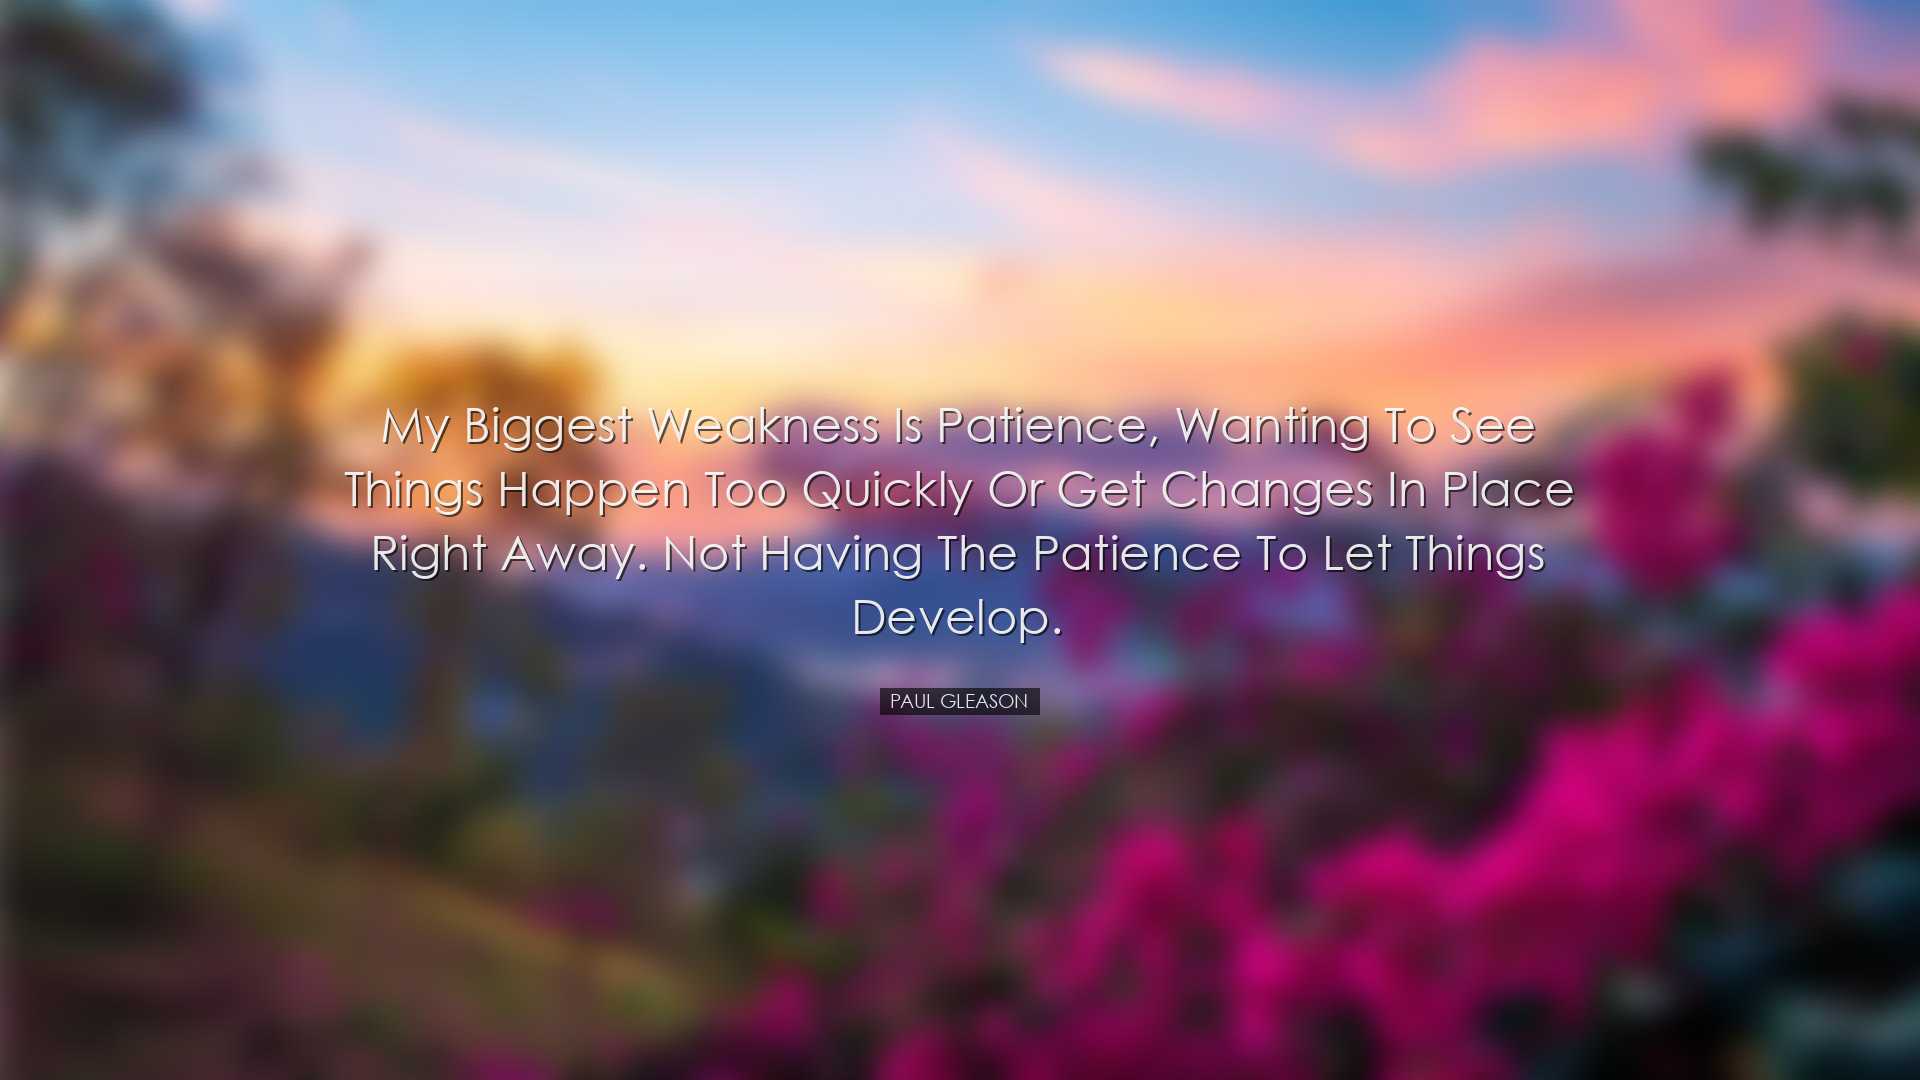 My biggest weakness is patience, wanting to see things happen too